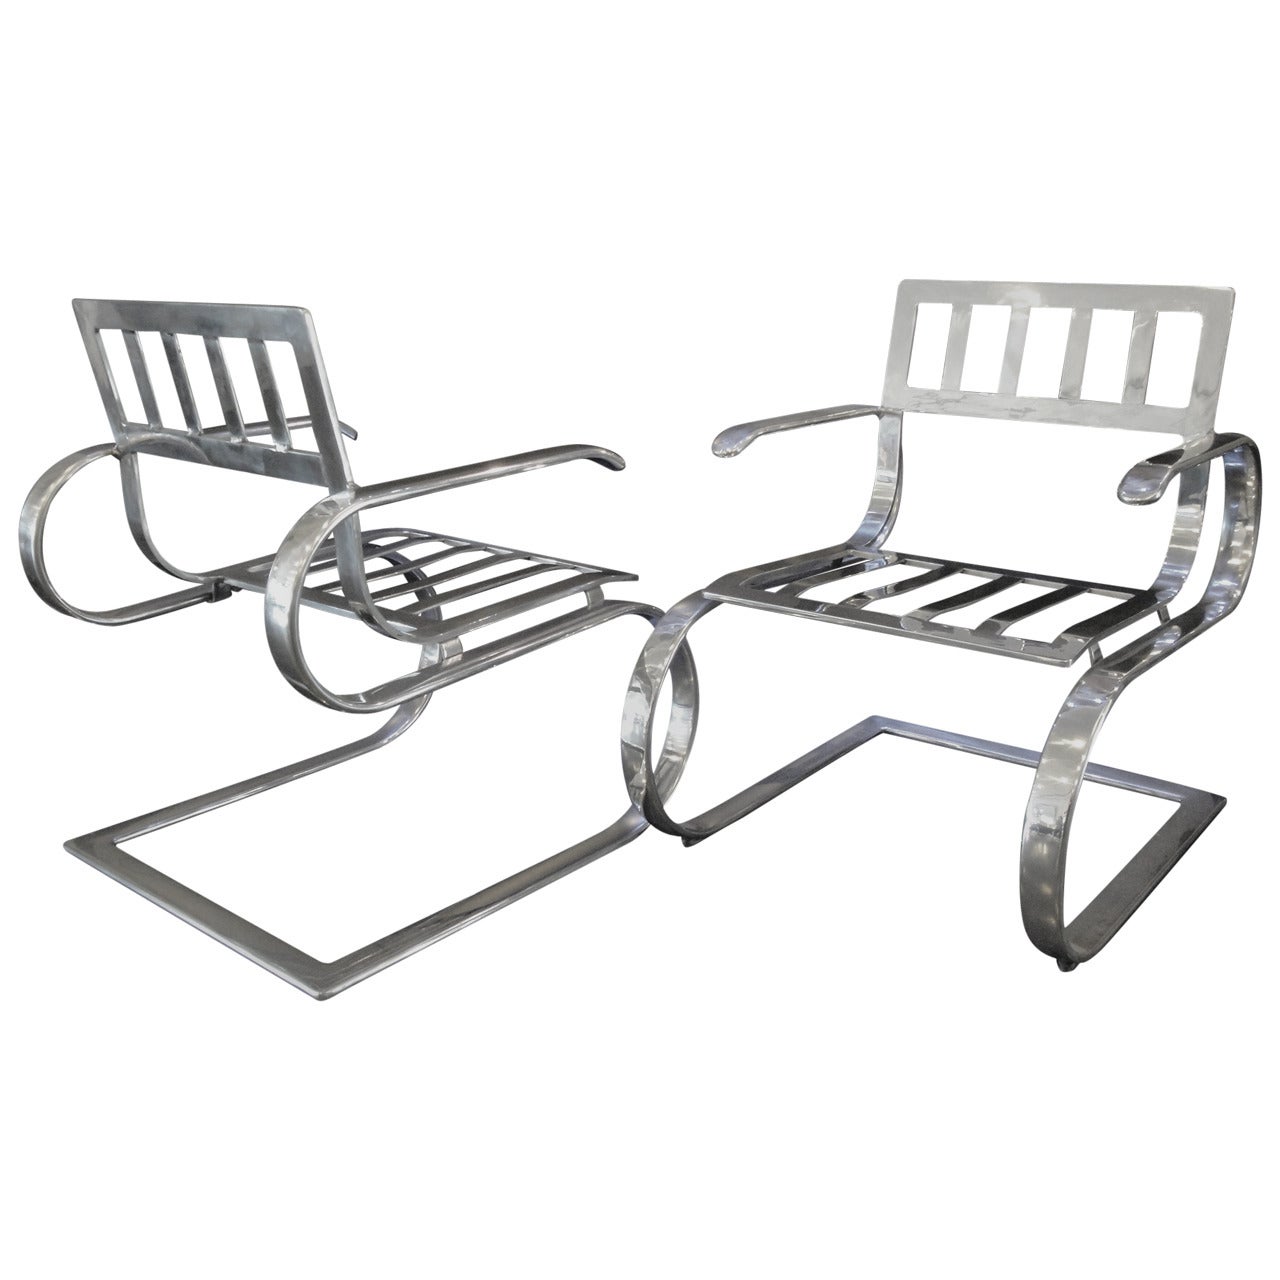 Pair of Aluminum Lounge Chairs and Ottoman